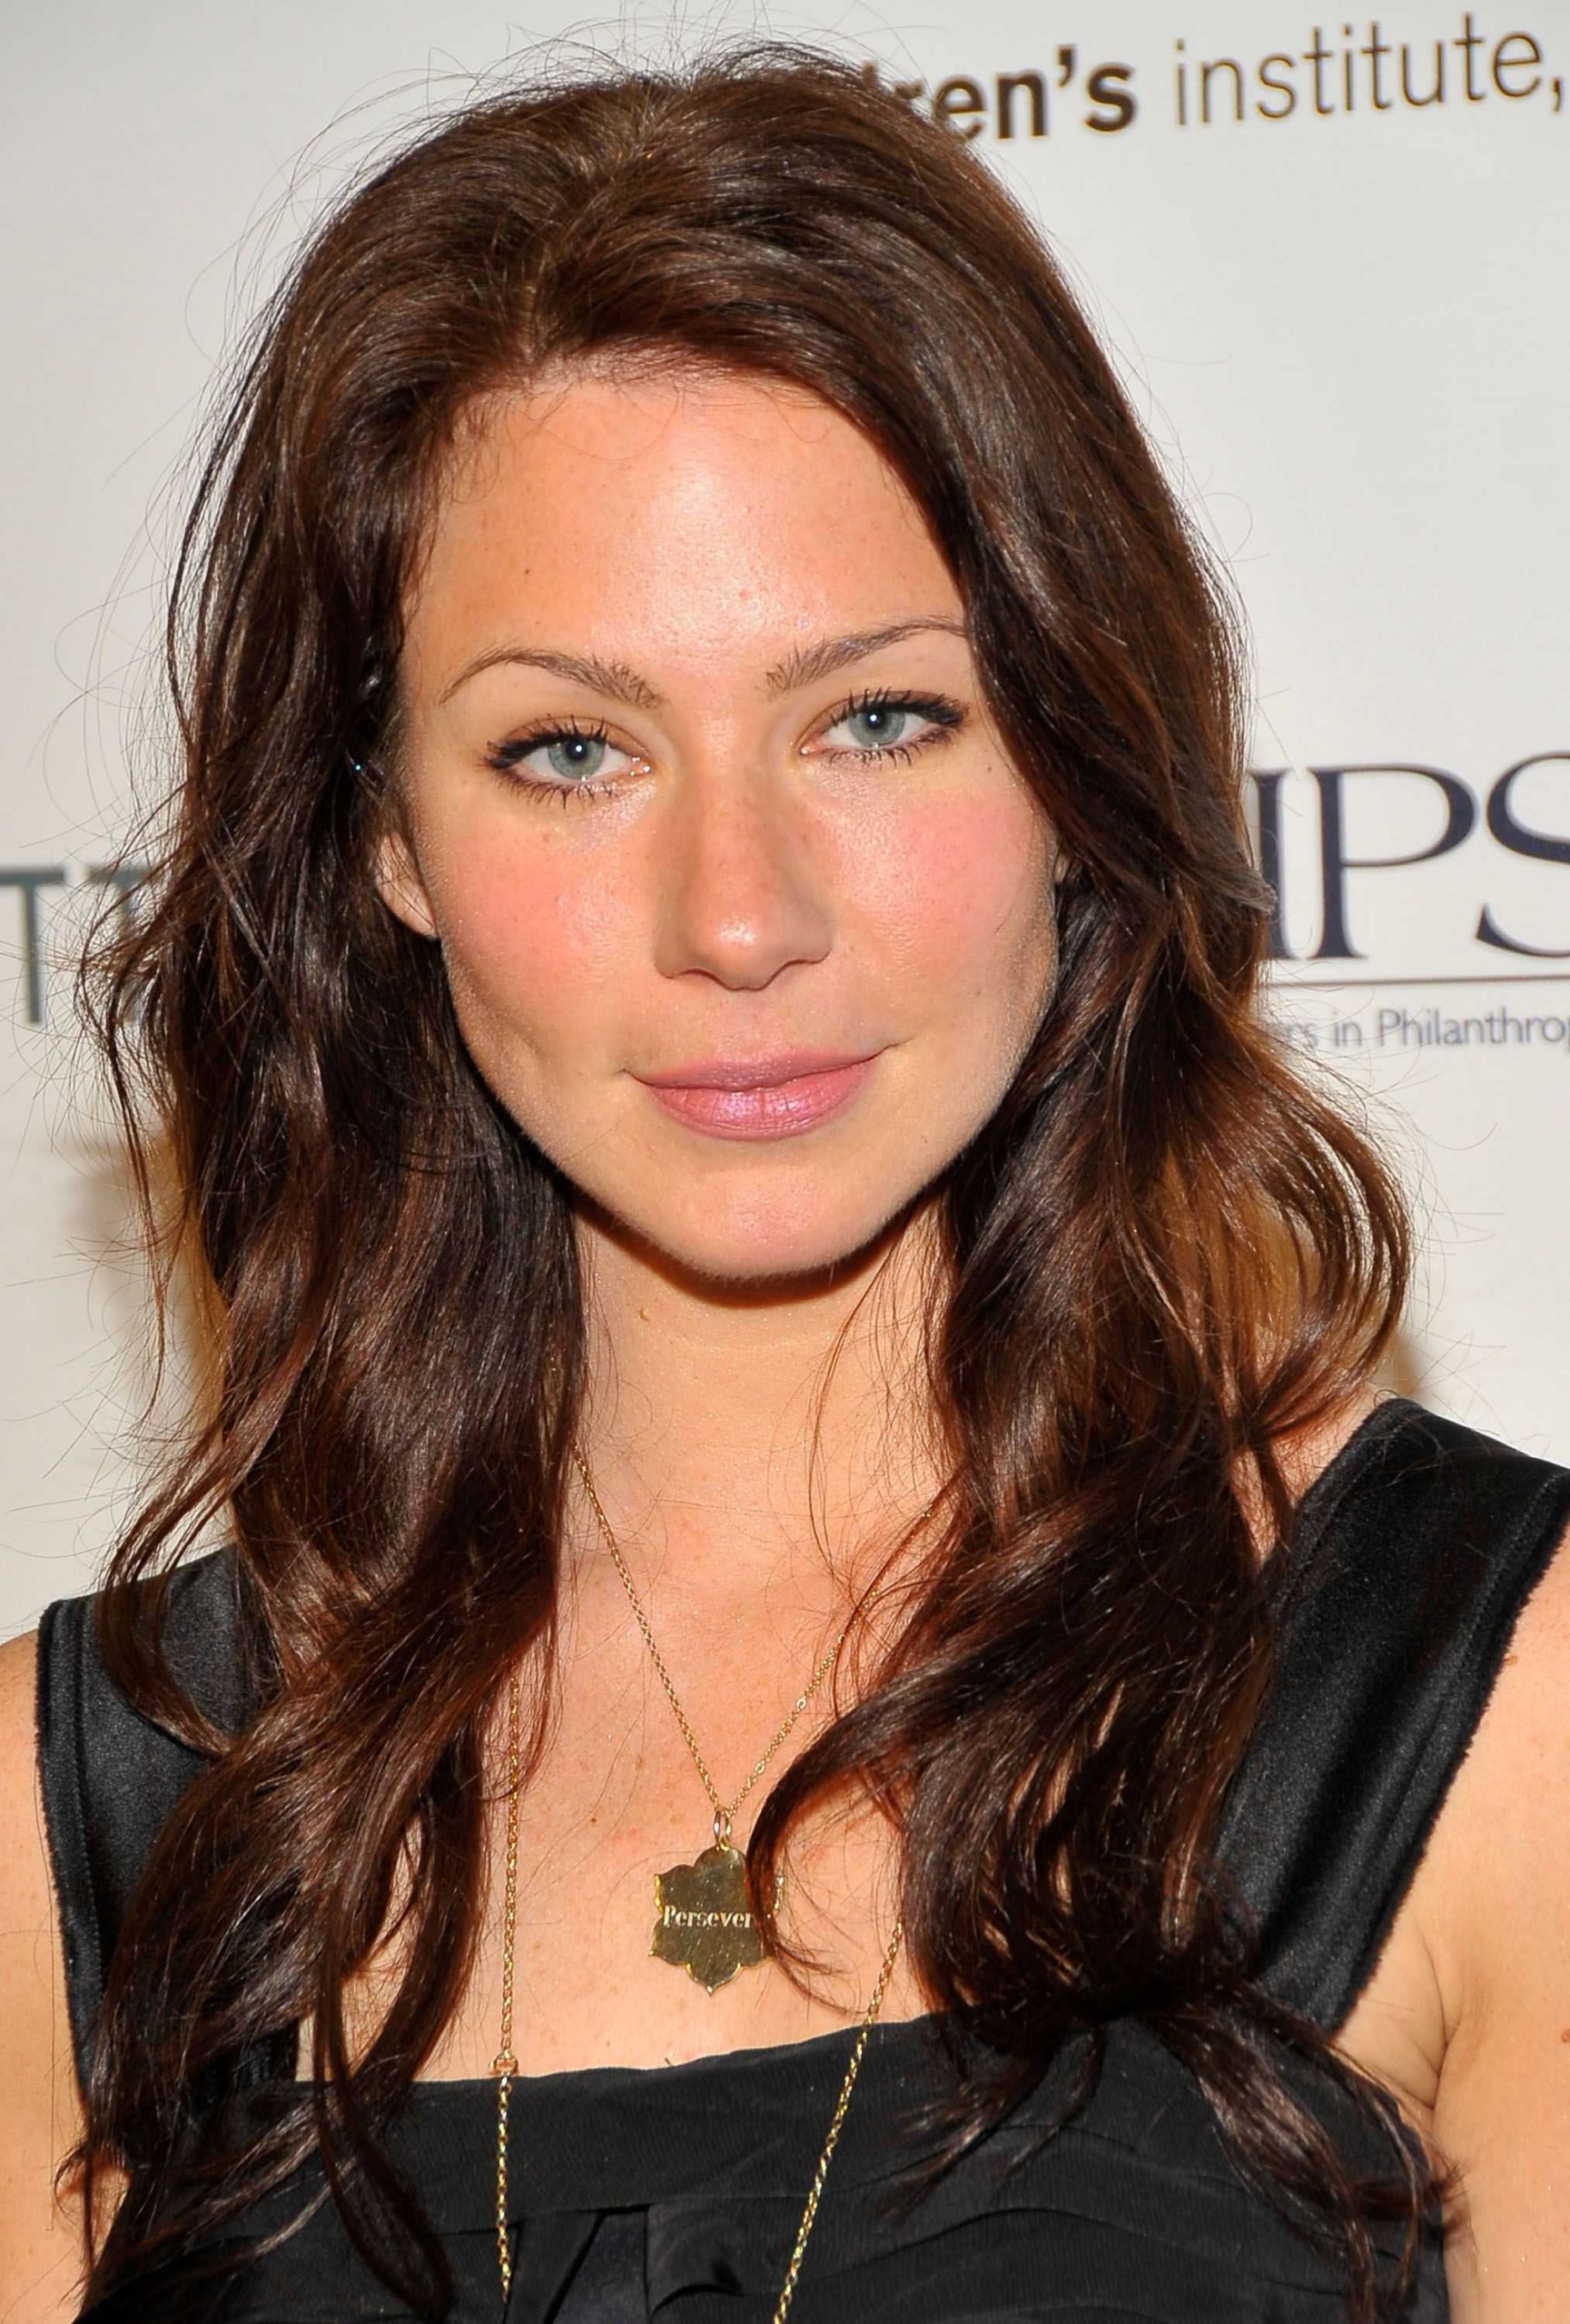 70+ Hot Pictures Of Lynn Collins Expose Her Smokin Hot Body 424